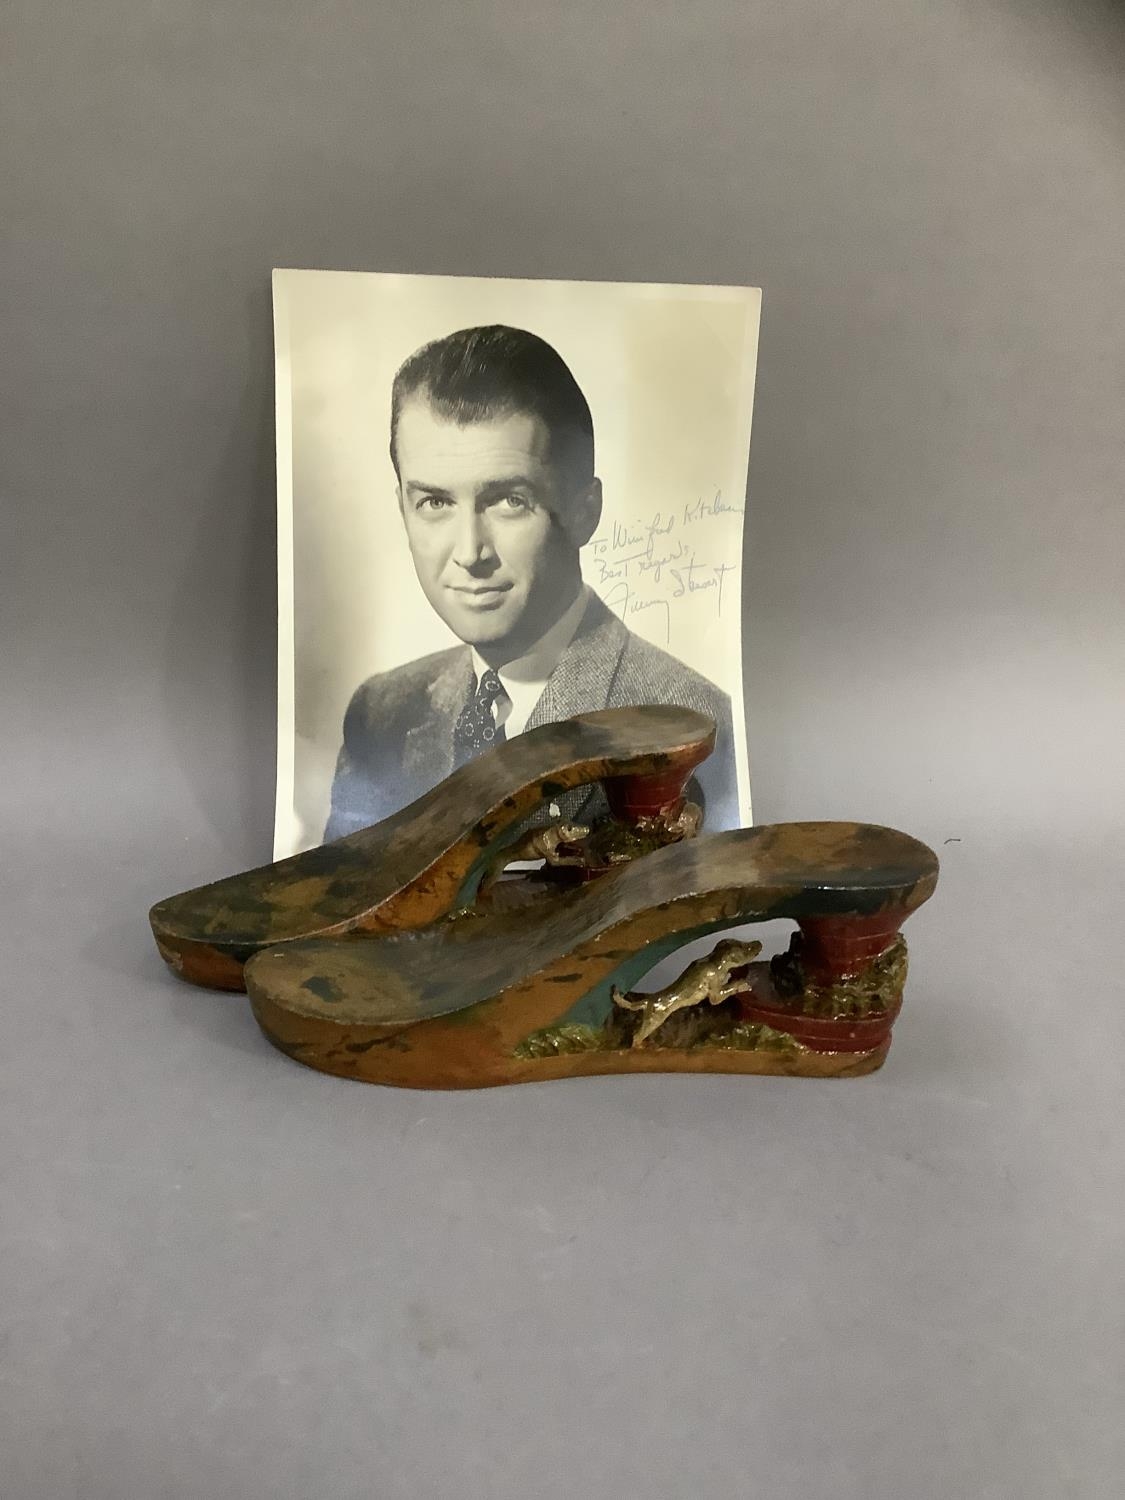 A pair of WWII painted wooden sandles and a photograph of James Stewart with inscription 'To